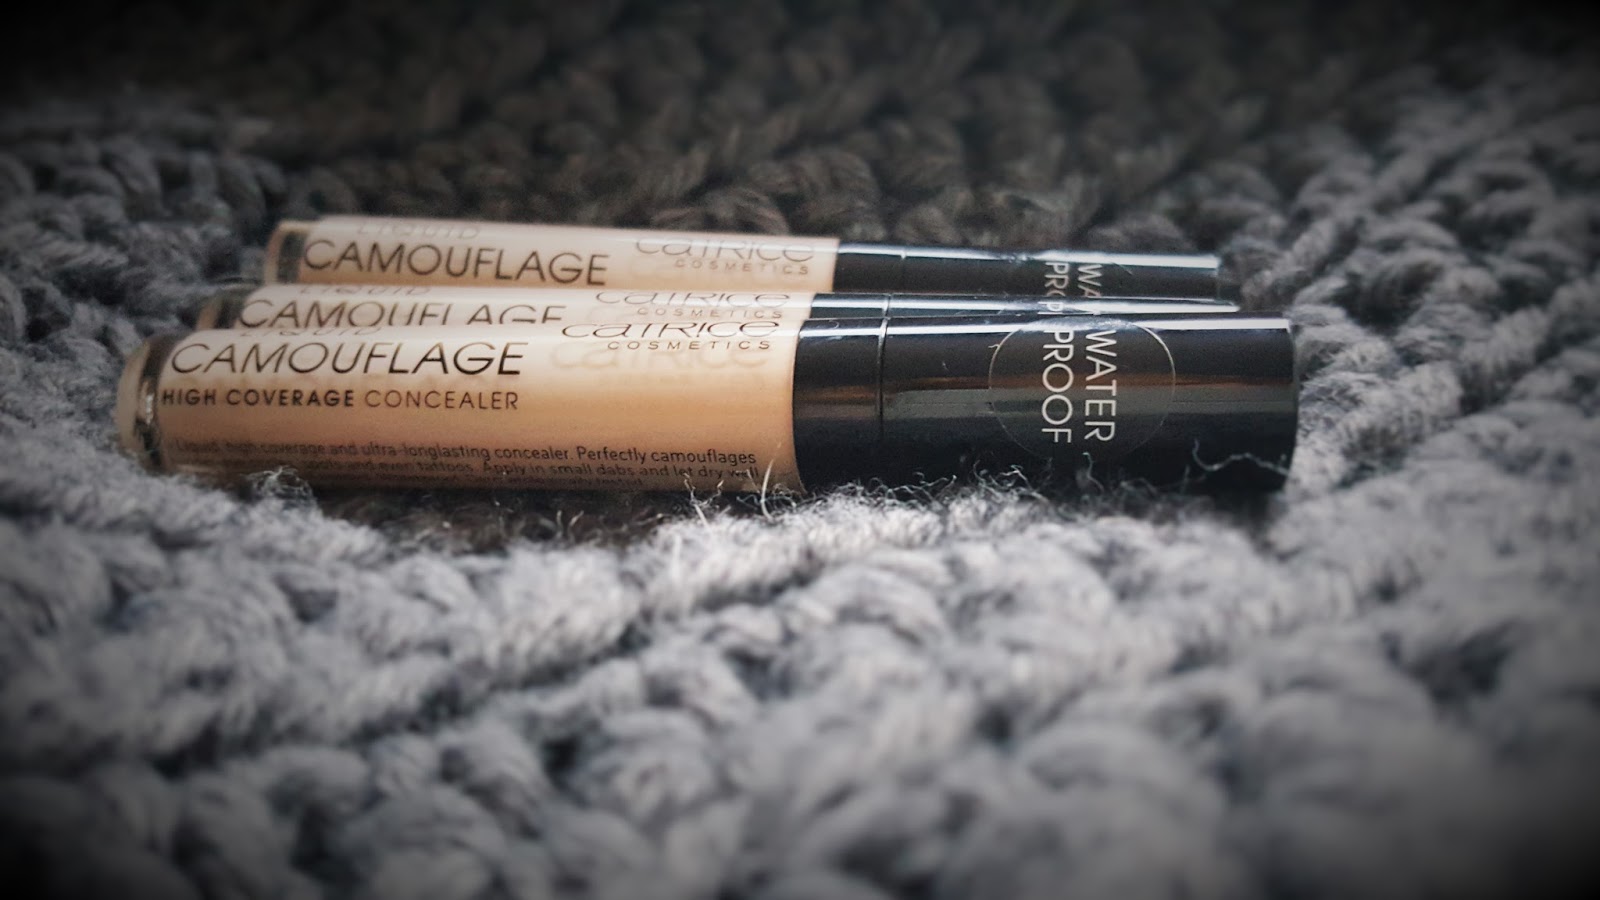 Livelivethings: Catrice Liquid Camouflage High Coverage